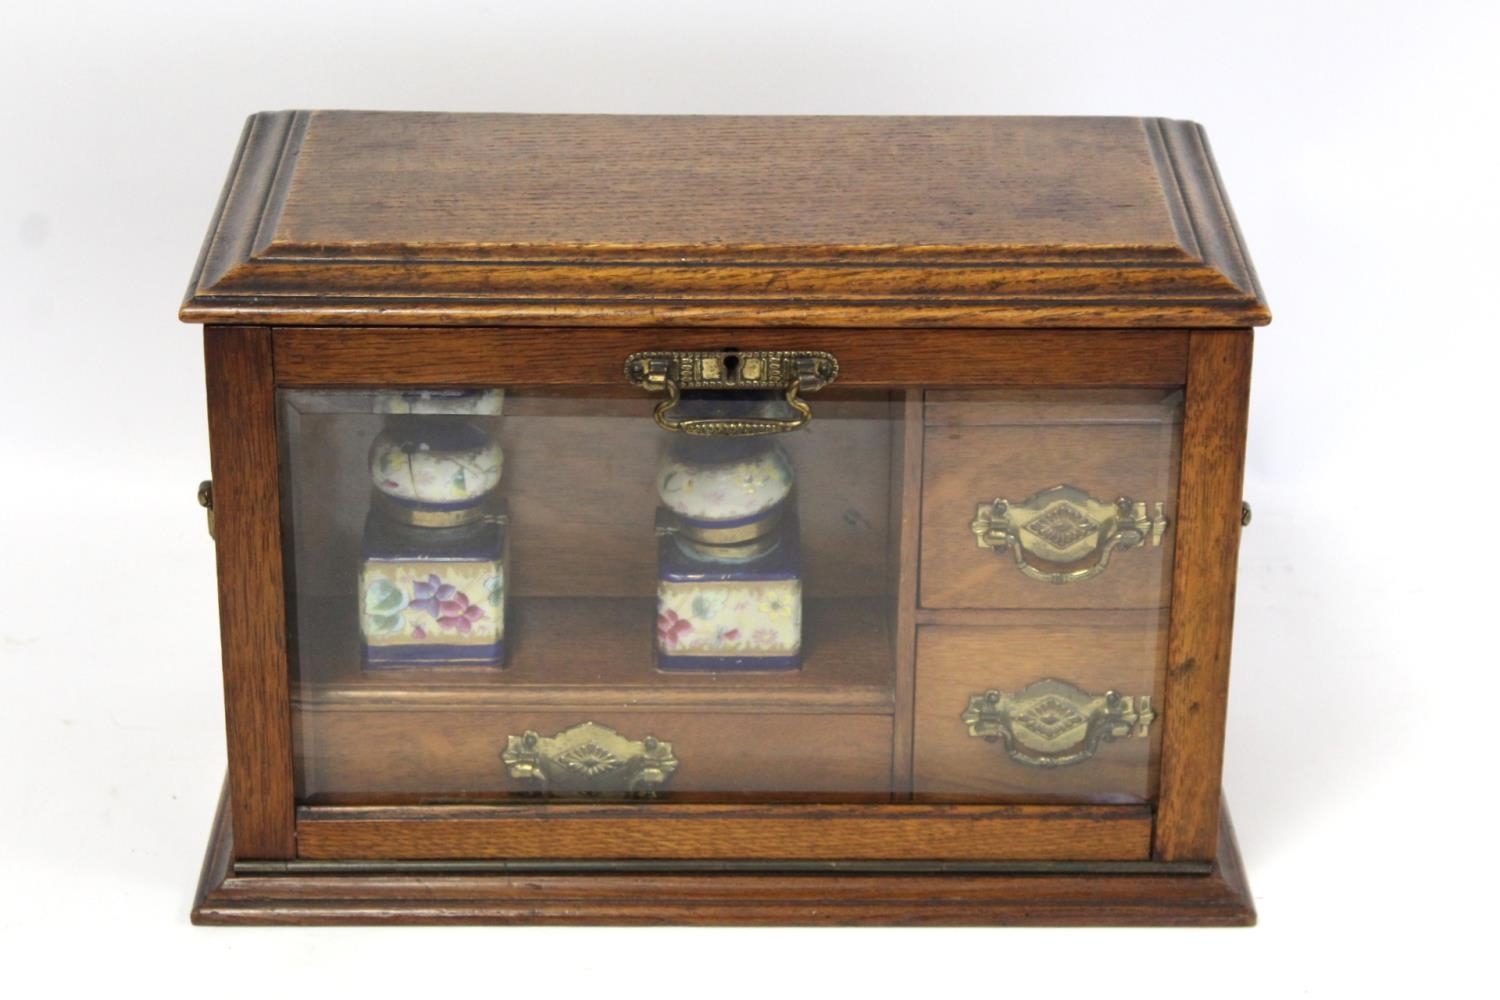 Unusual late 19th or early 20th century oak writing box of twin handled rectangular form with glazed